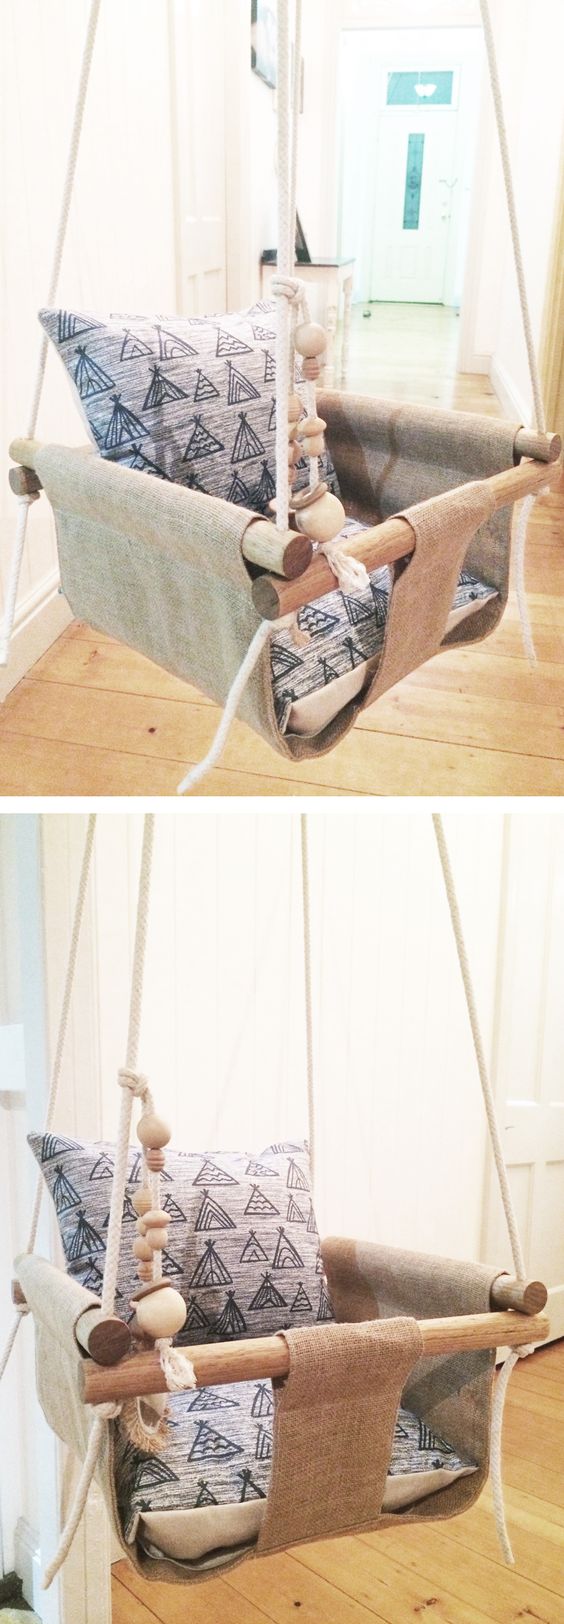 HandmadE Burlap Baby Swing Will Be a Perfect Gift for a Toddler Mom. 